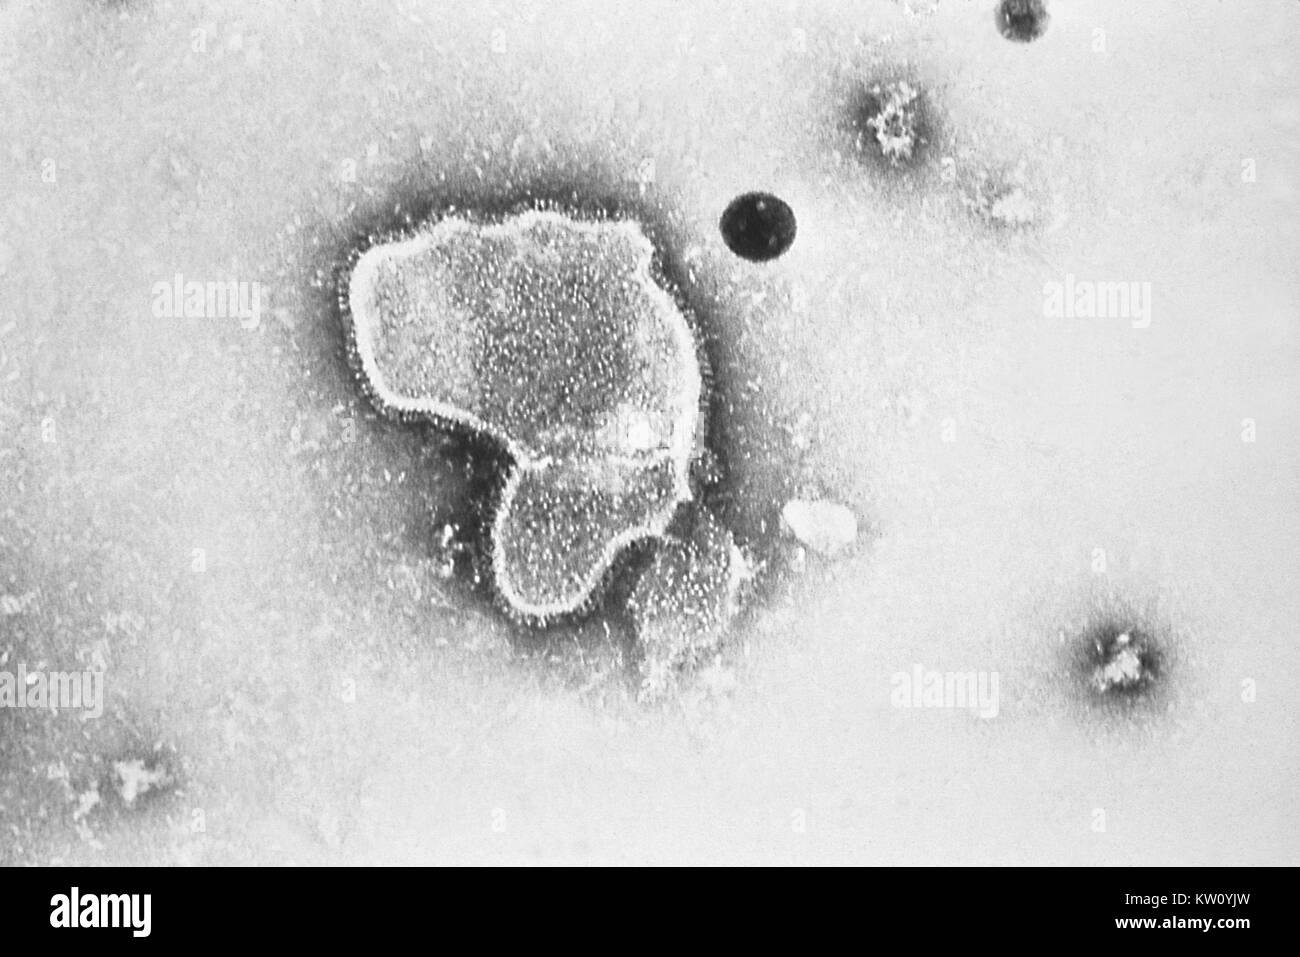 This transmission electron micrograph (TEM) reveals the morphologic traits of the Respiratory Syncytial Virus (RSV). The virion is variable in shape, and size (average diameter of between 120-300nm). RSV is the most common cause of bronchiolitis and pneumonia among infants and children under 1 year of age. Image courtesy CDC/E. L. Palmer, 1981. Stock Photo